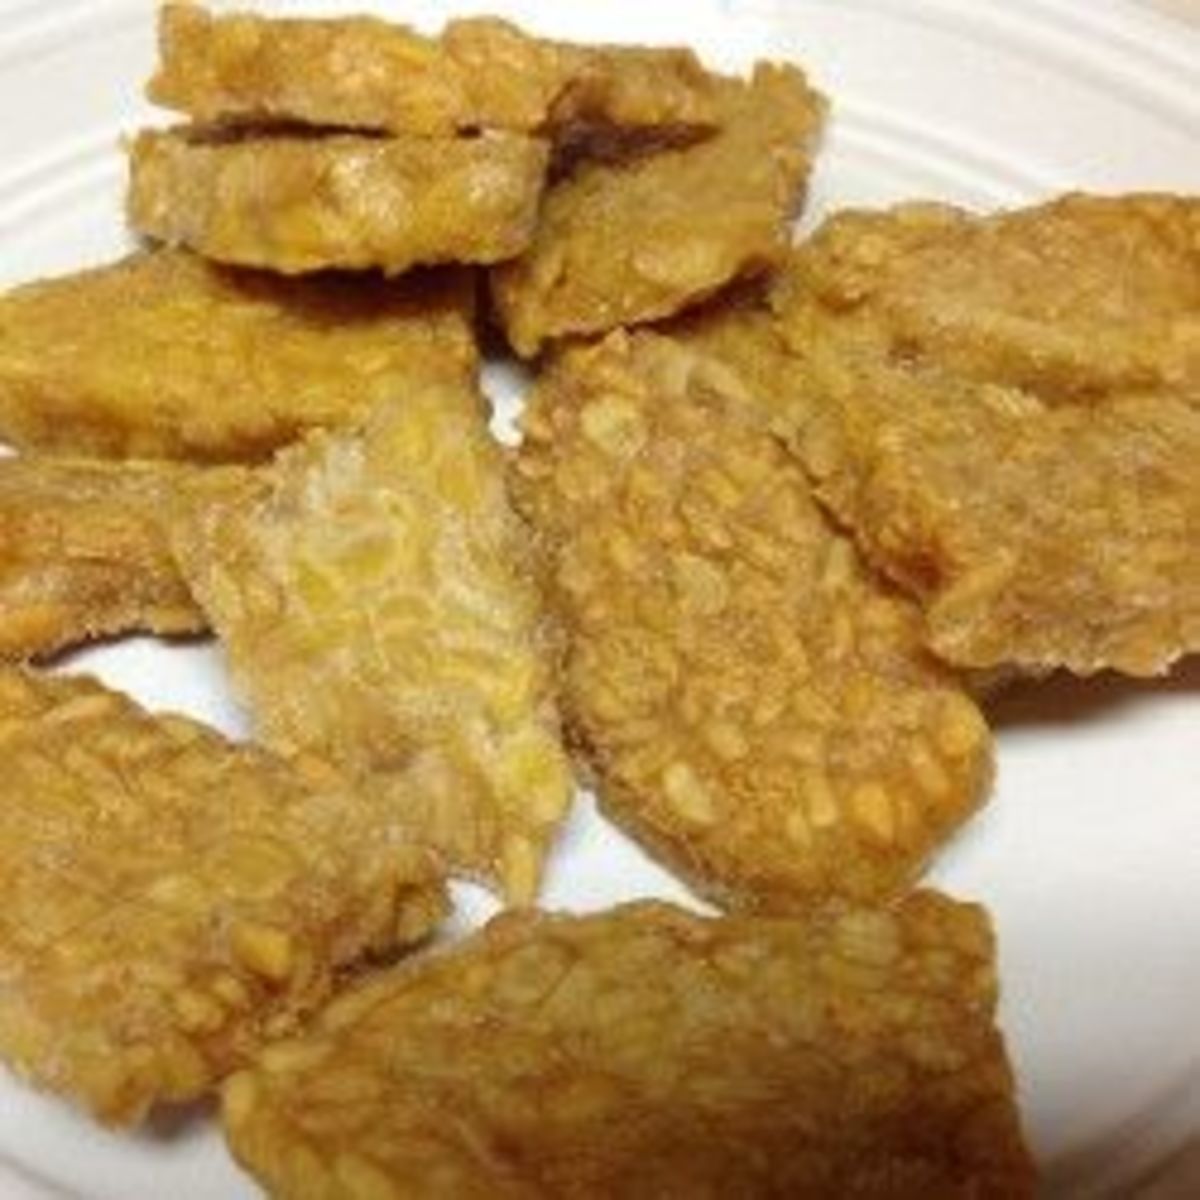 How to Make Tempeh in An Easy Way